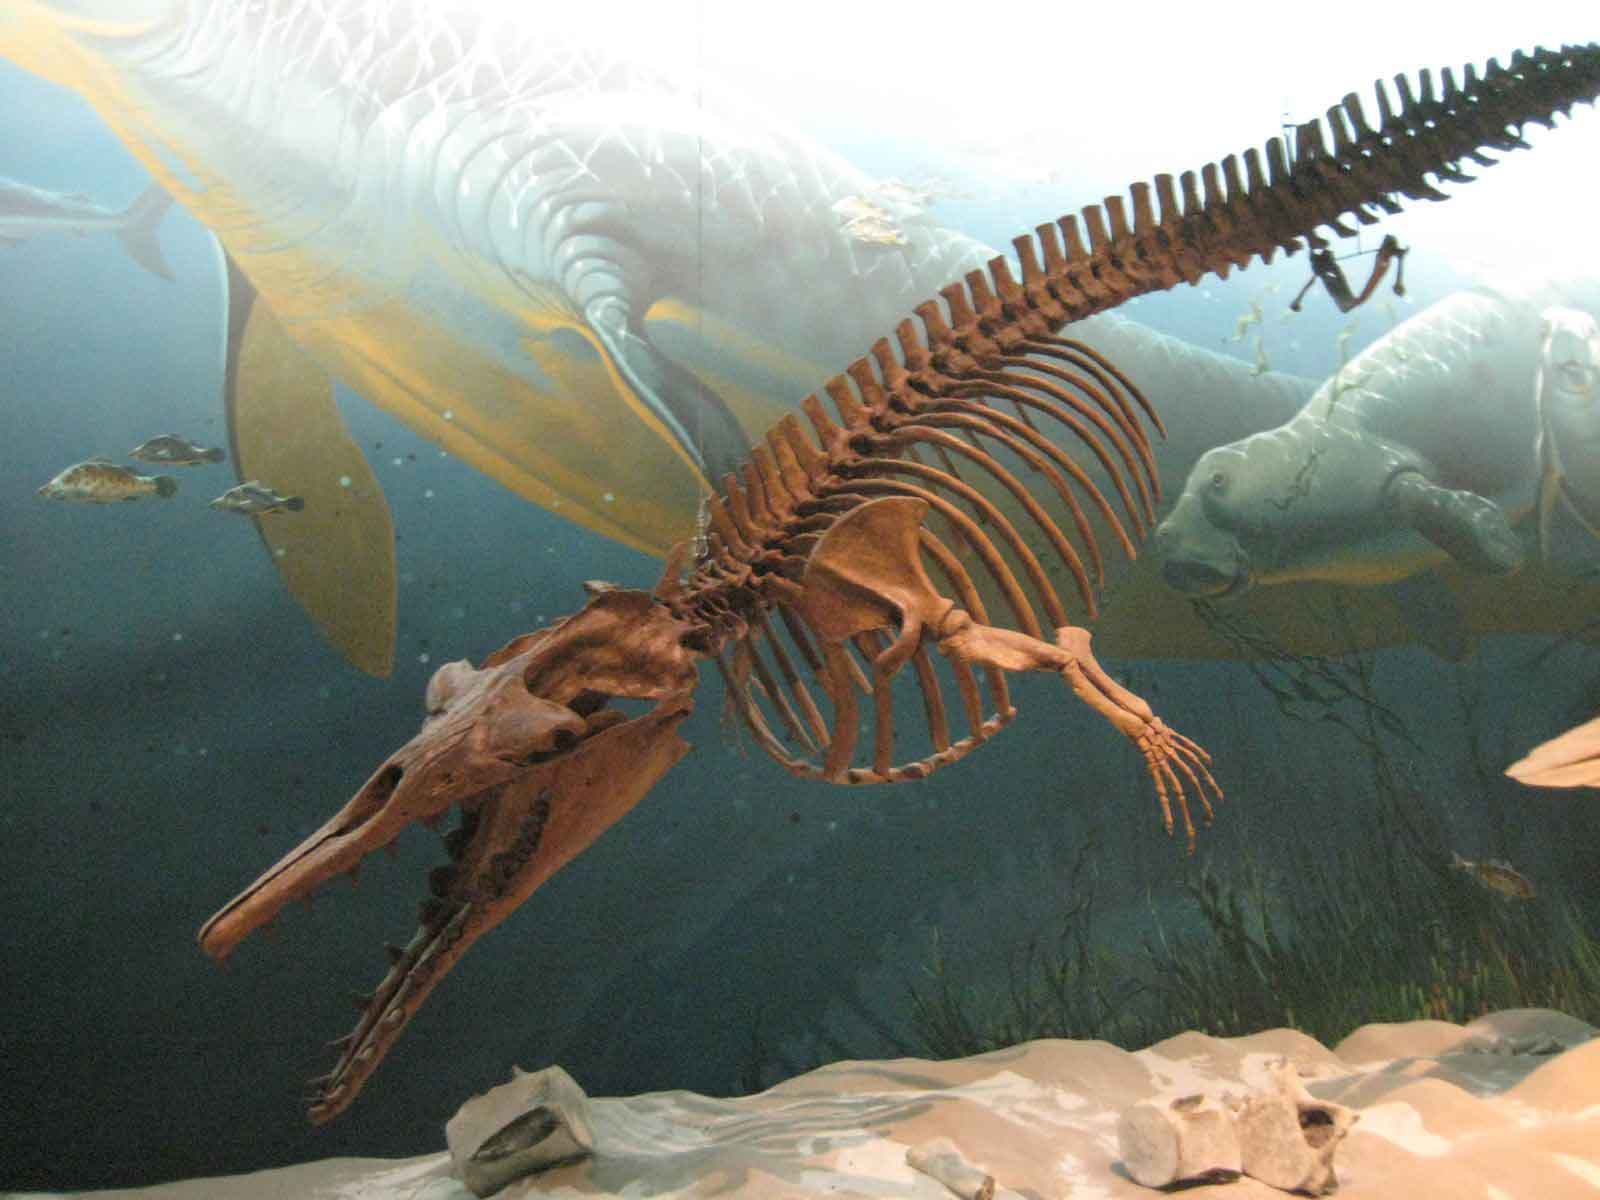 Photograph of a specimen of Zygorhiza, an ancient whale, on display at the Smithsonian.